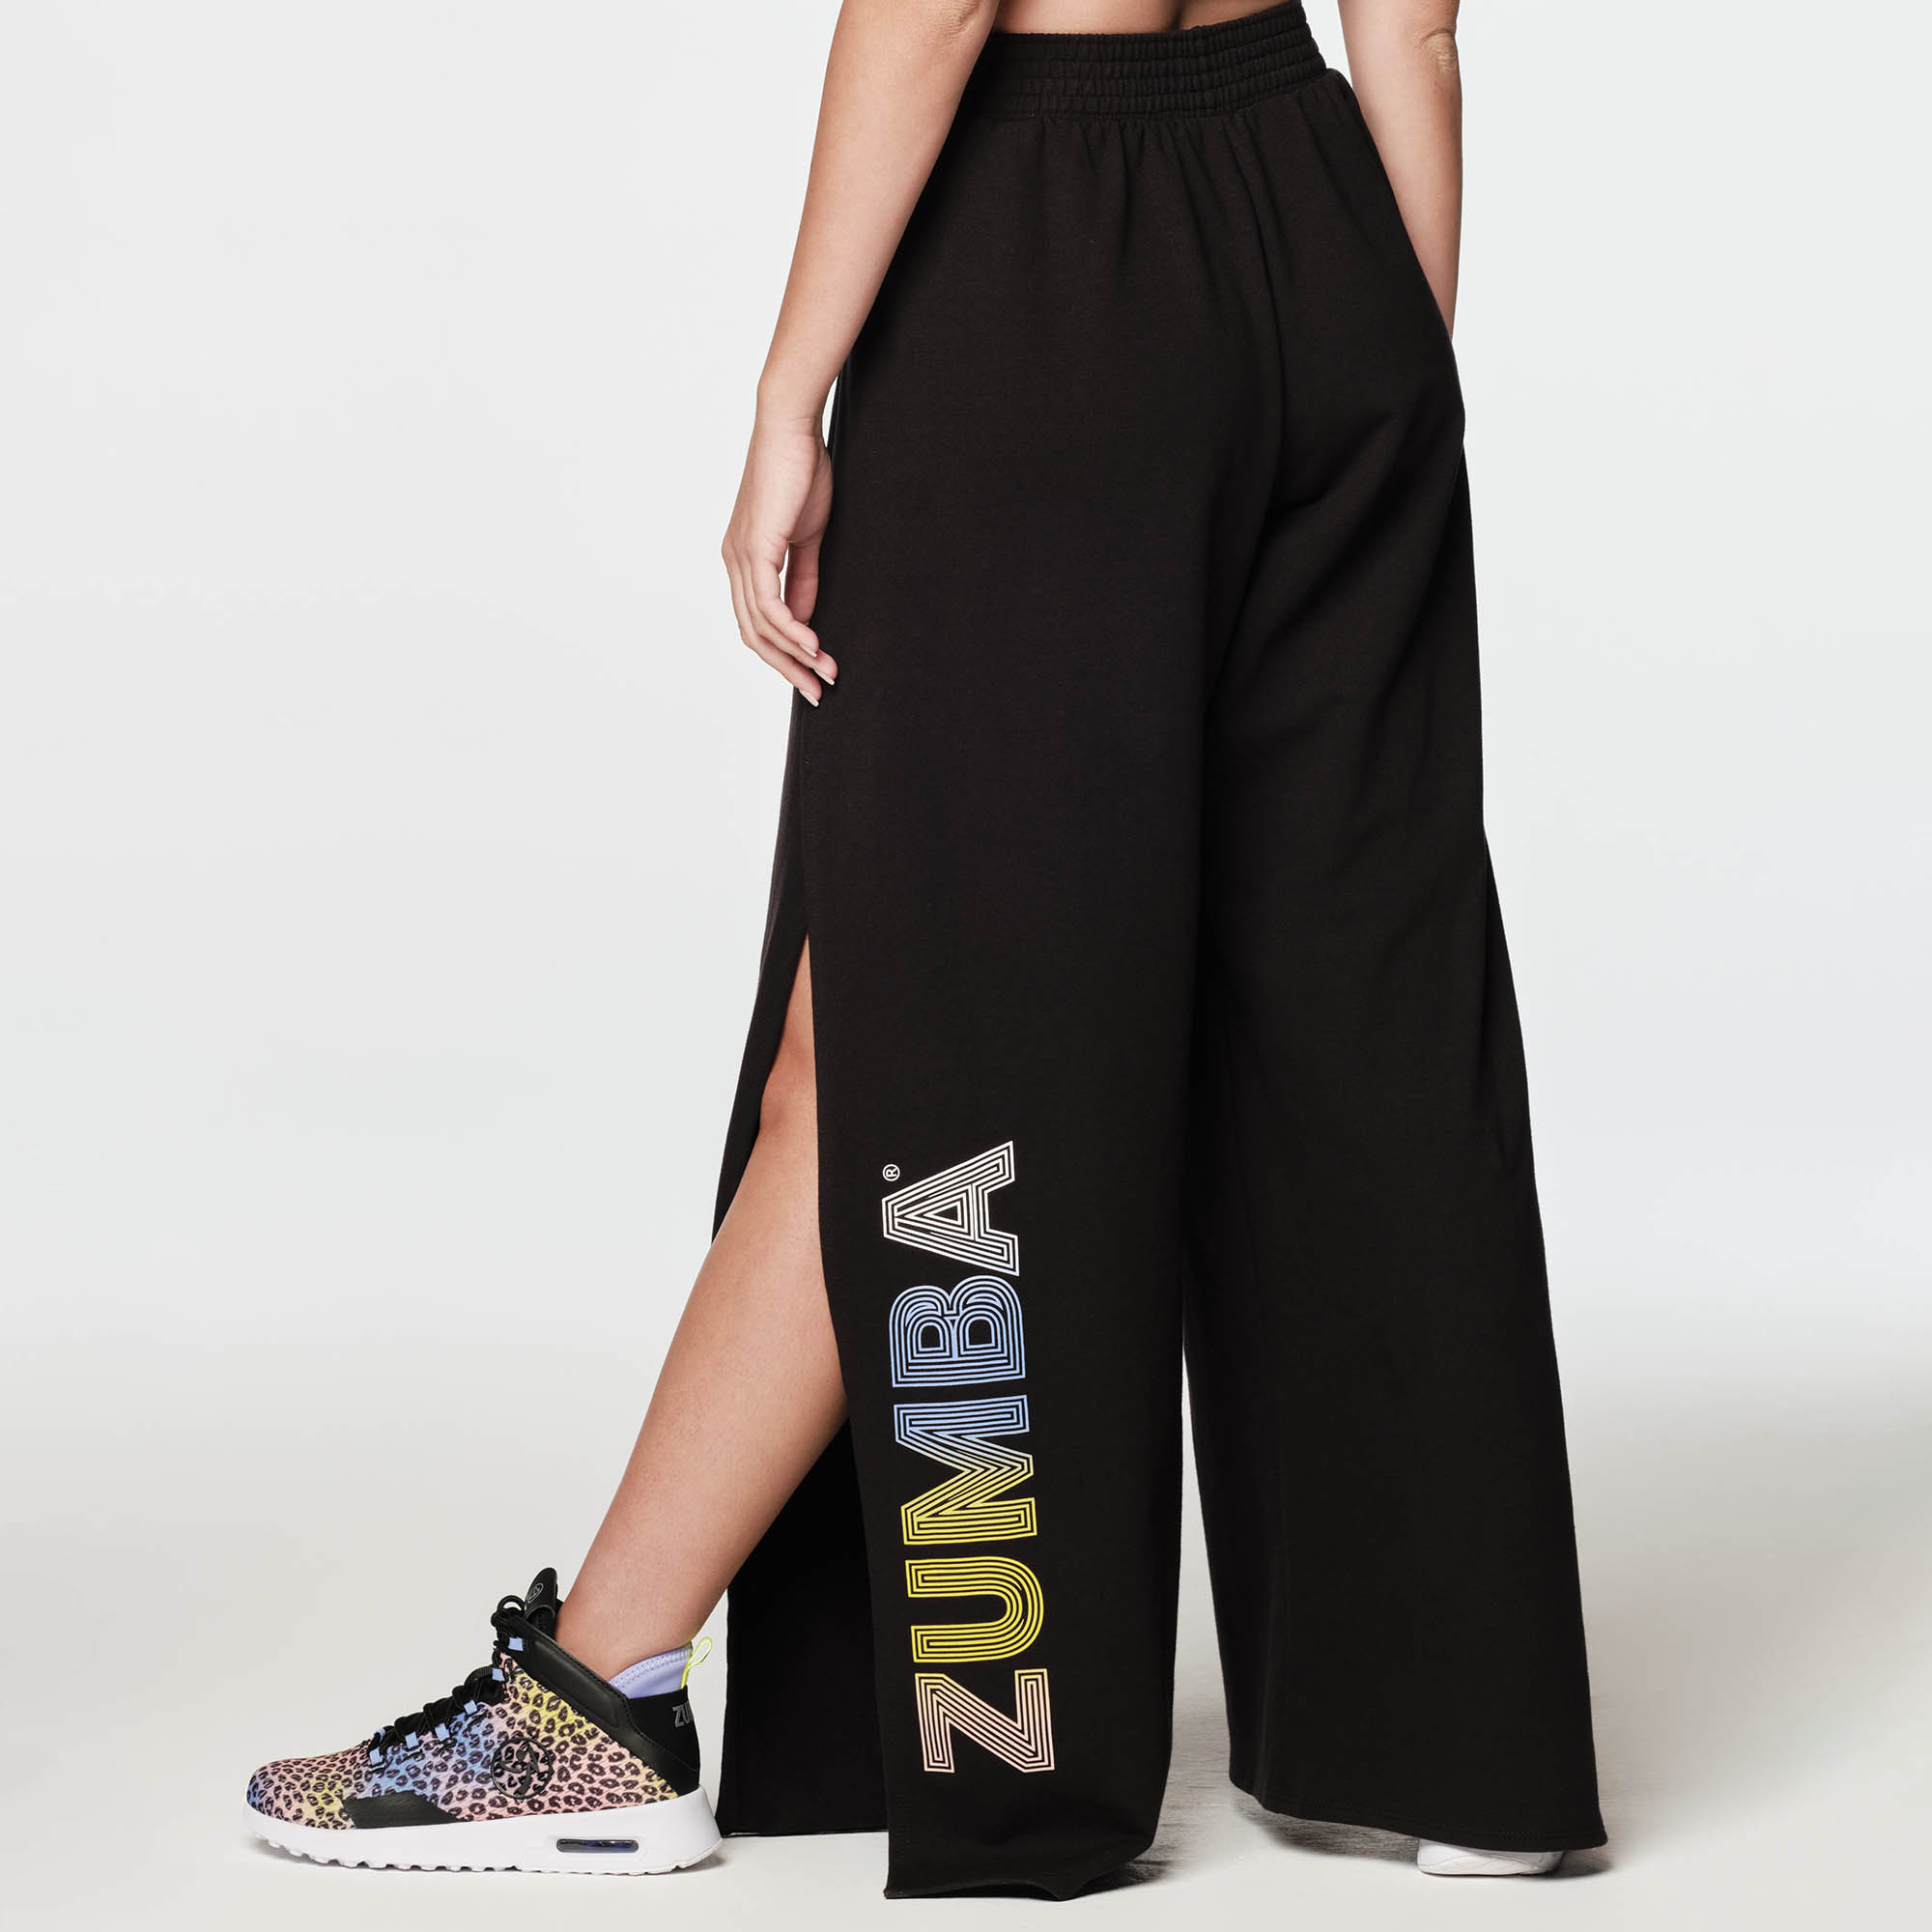 Shop the Stylish and Supportive Zumba Roller Derby High Waisted